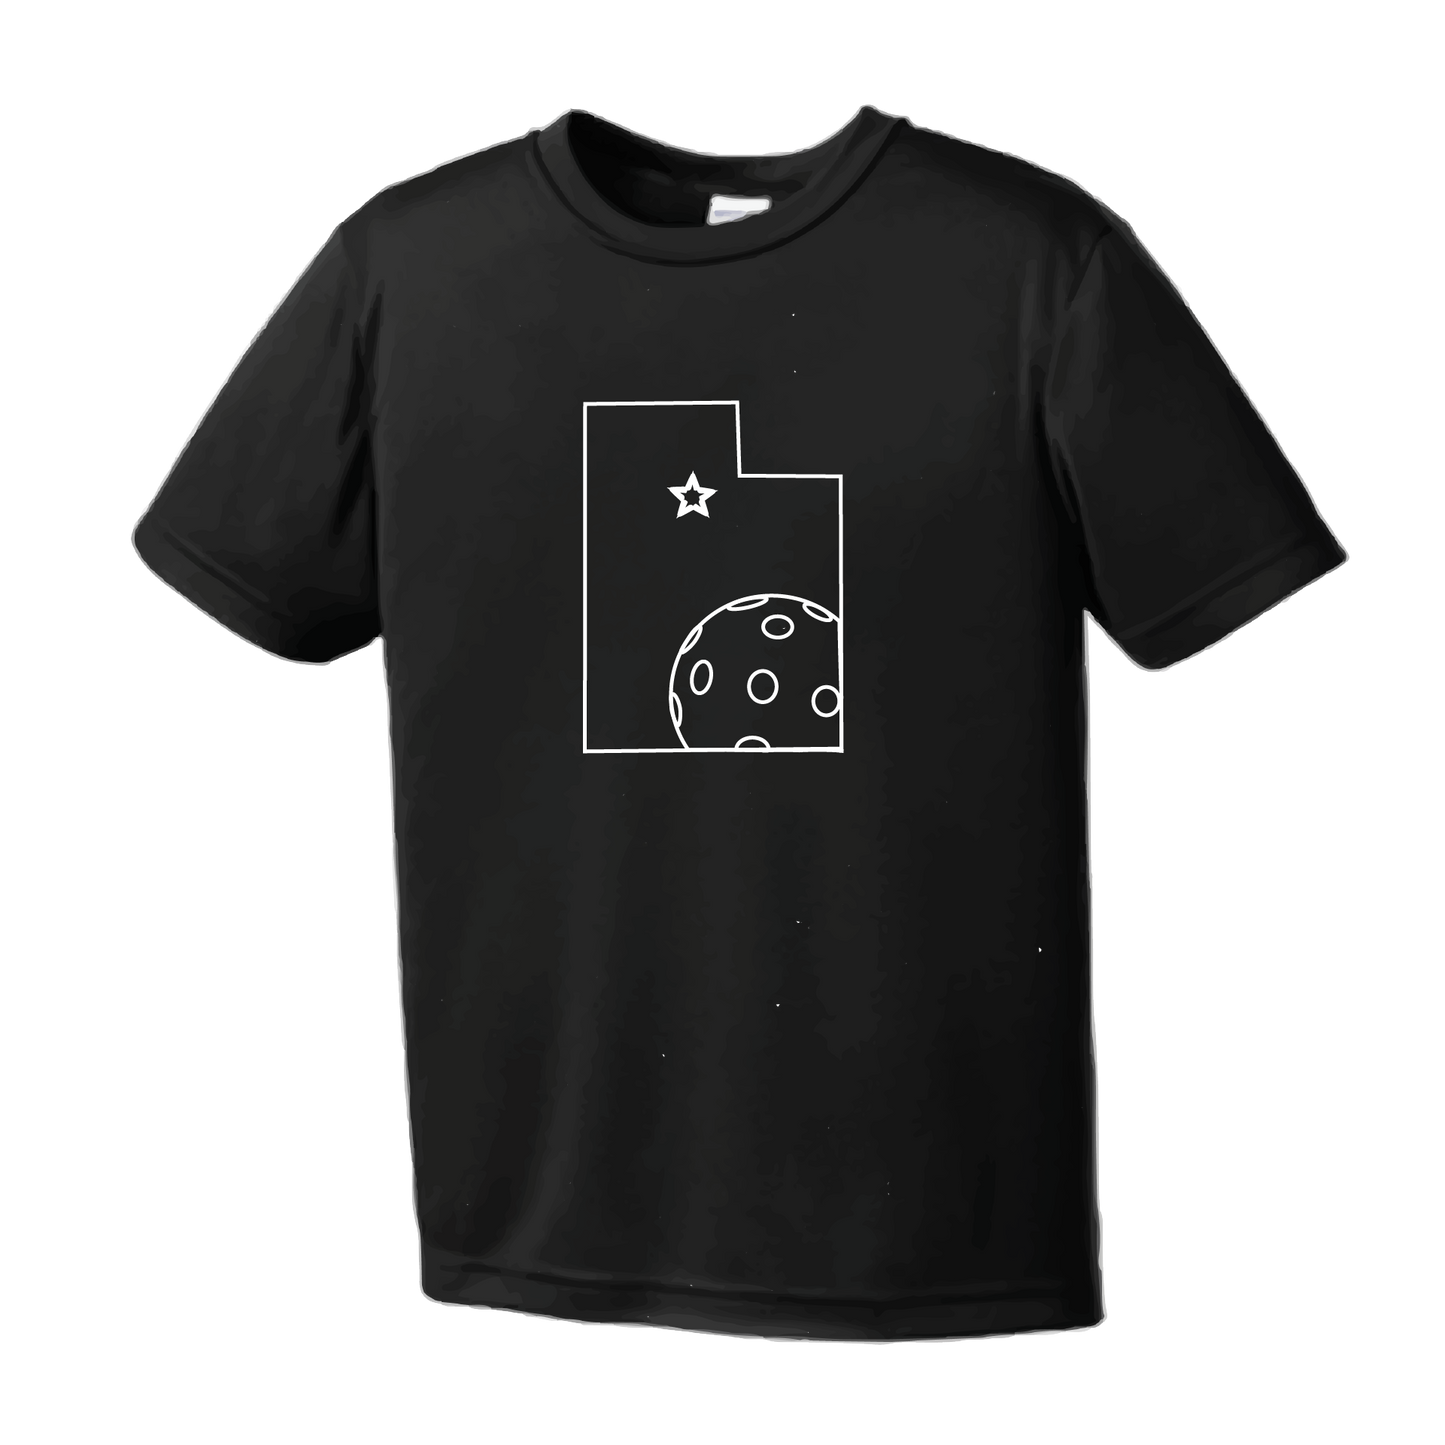 Pickleball Design: Utah with Star and Ball.   Style:  Short-Sleeve  Shirts are lightweight, roomy and highly breathable. These moisture-wicking shirts are designed for athletic performance. They feature PosiCharge technology to lock in color and prevent logos from fading. Removable tag and set-in sleeves for comfort.